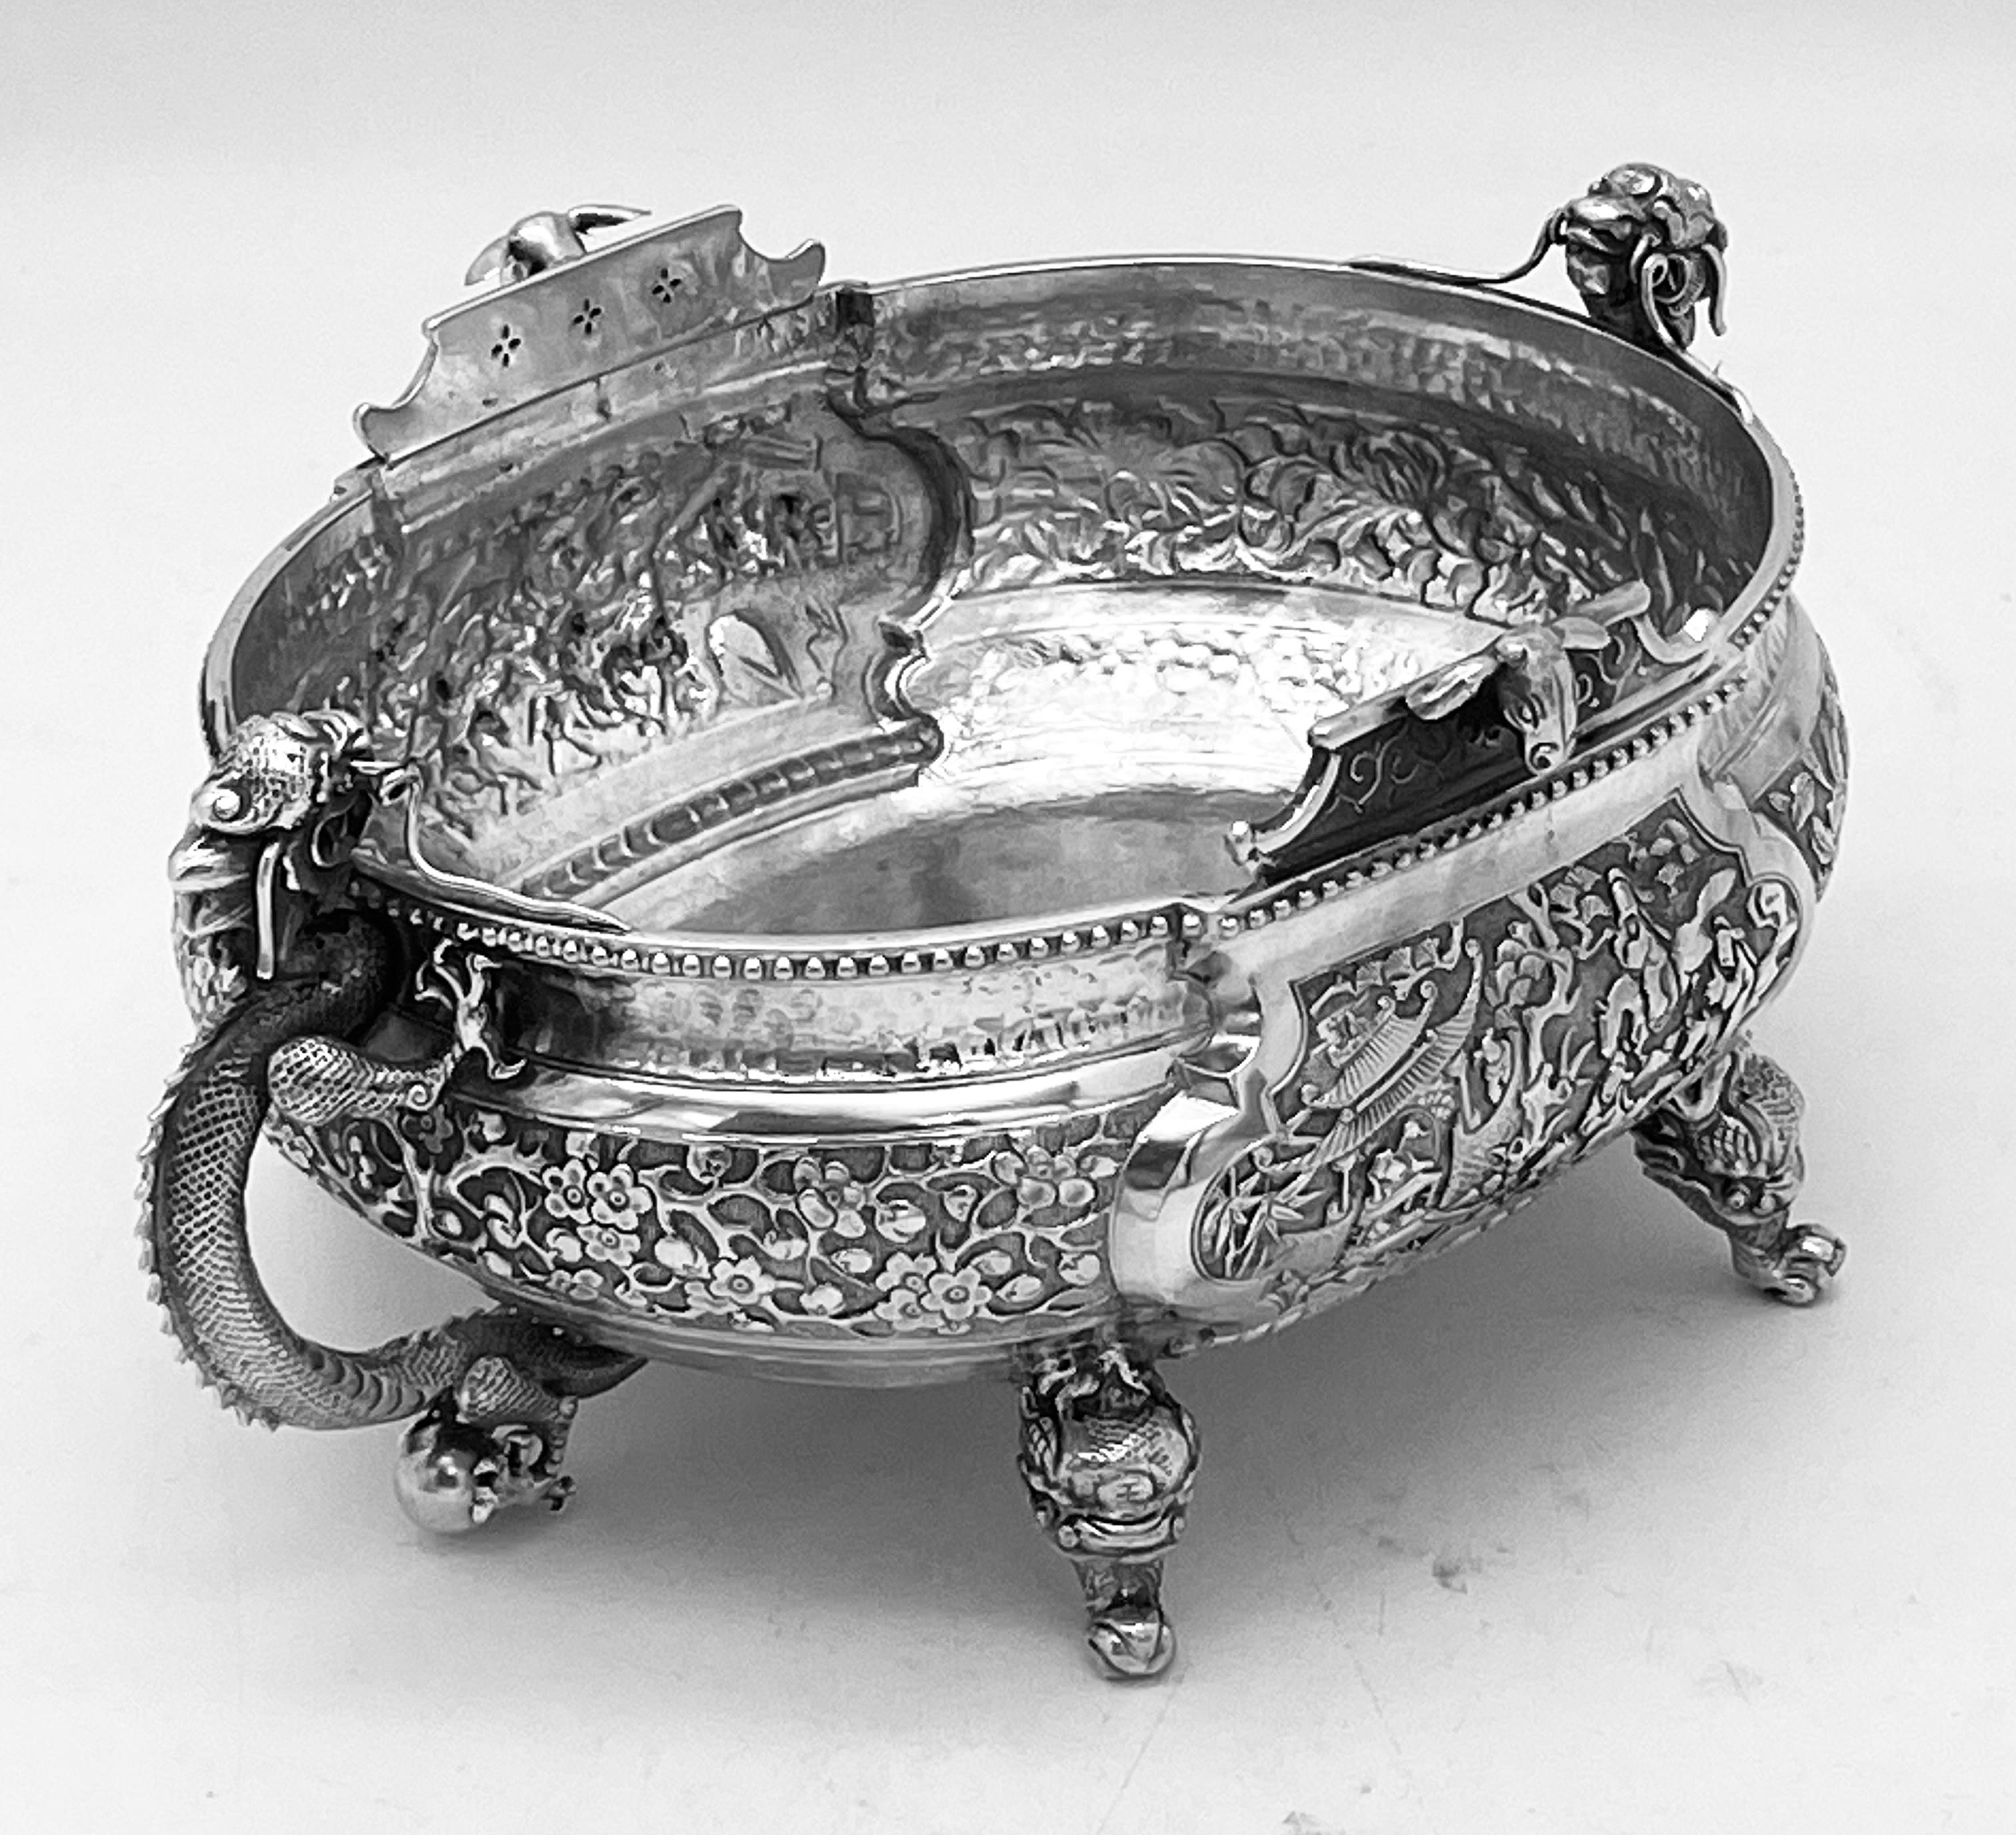 Chinese Export Silver Bowl For Sale 3